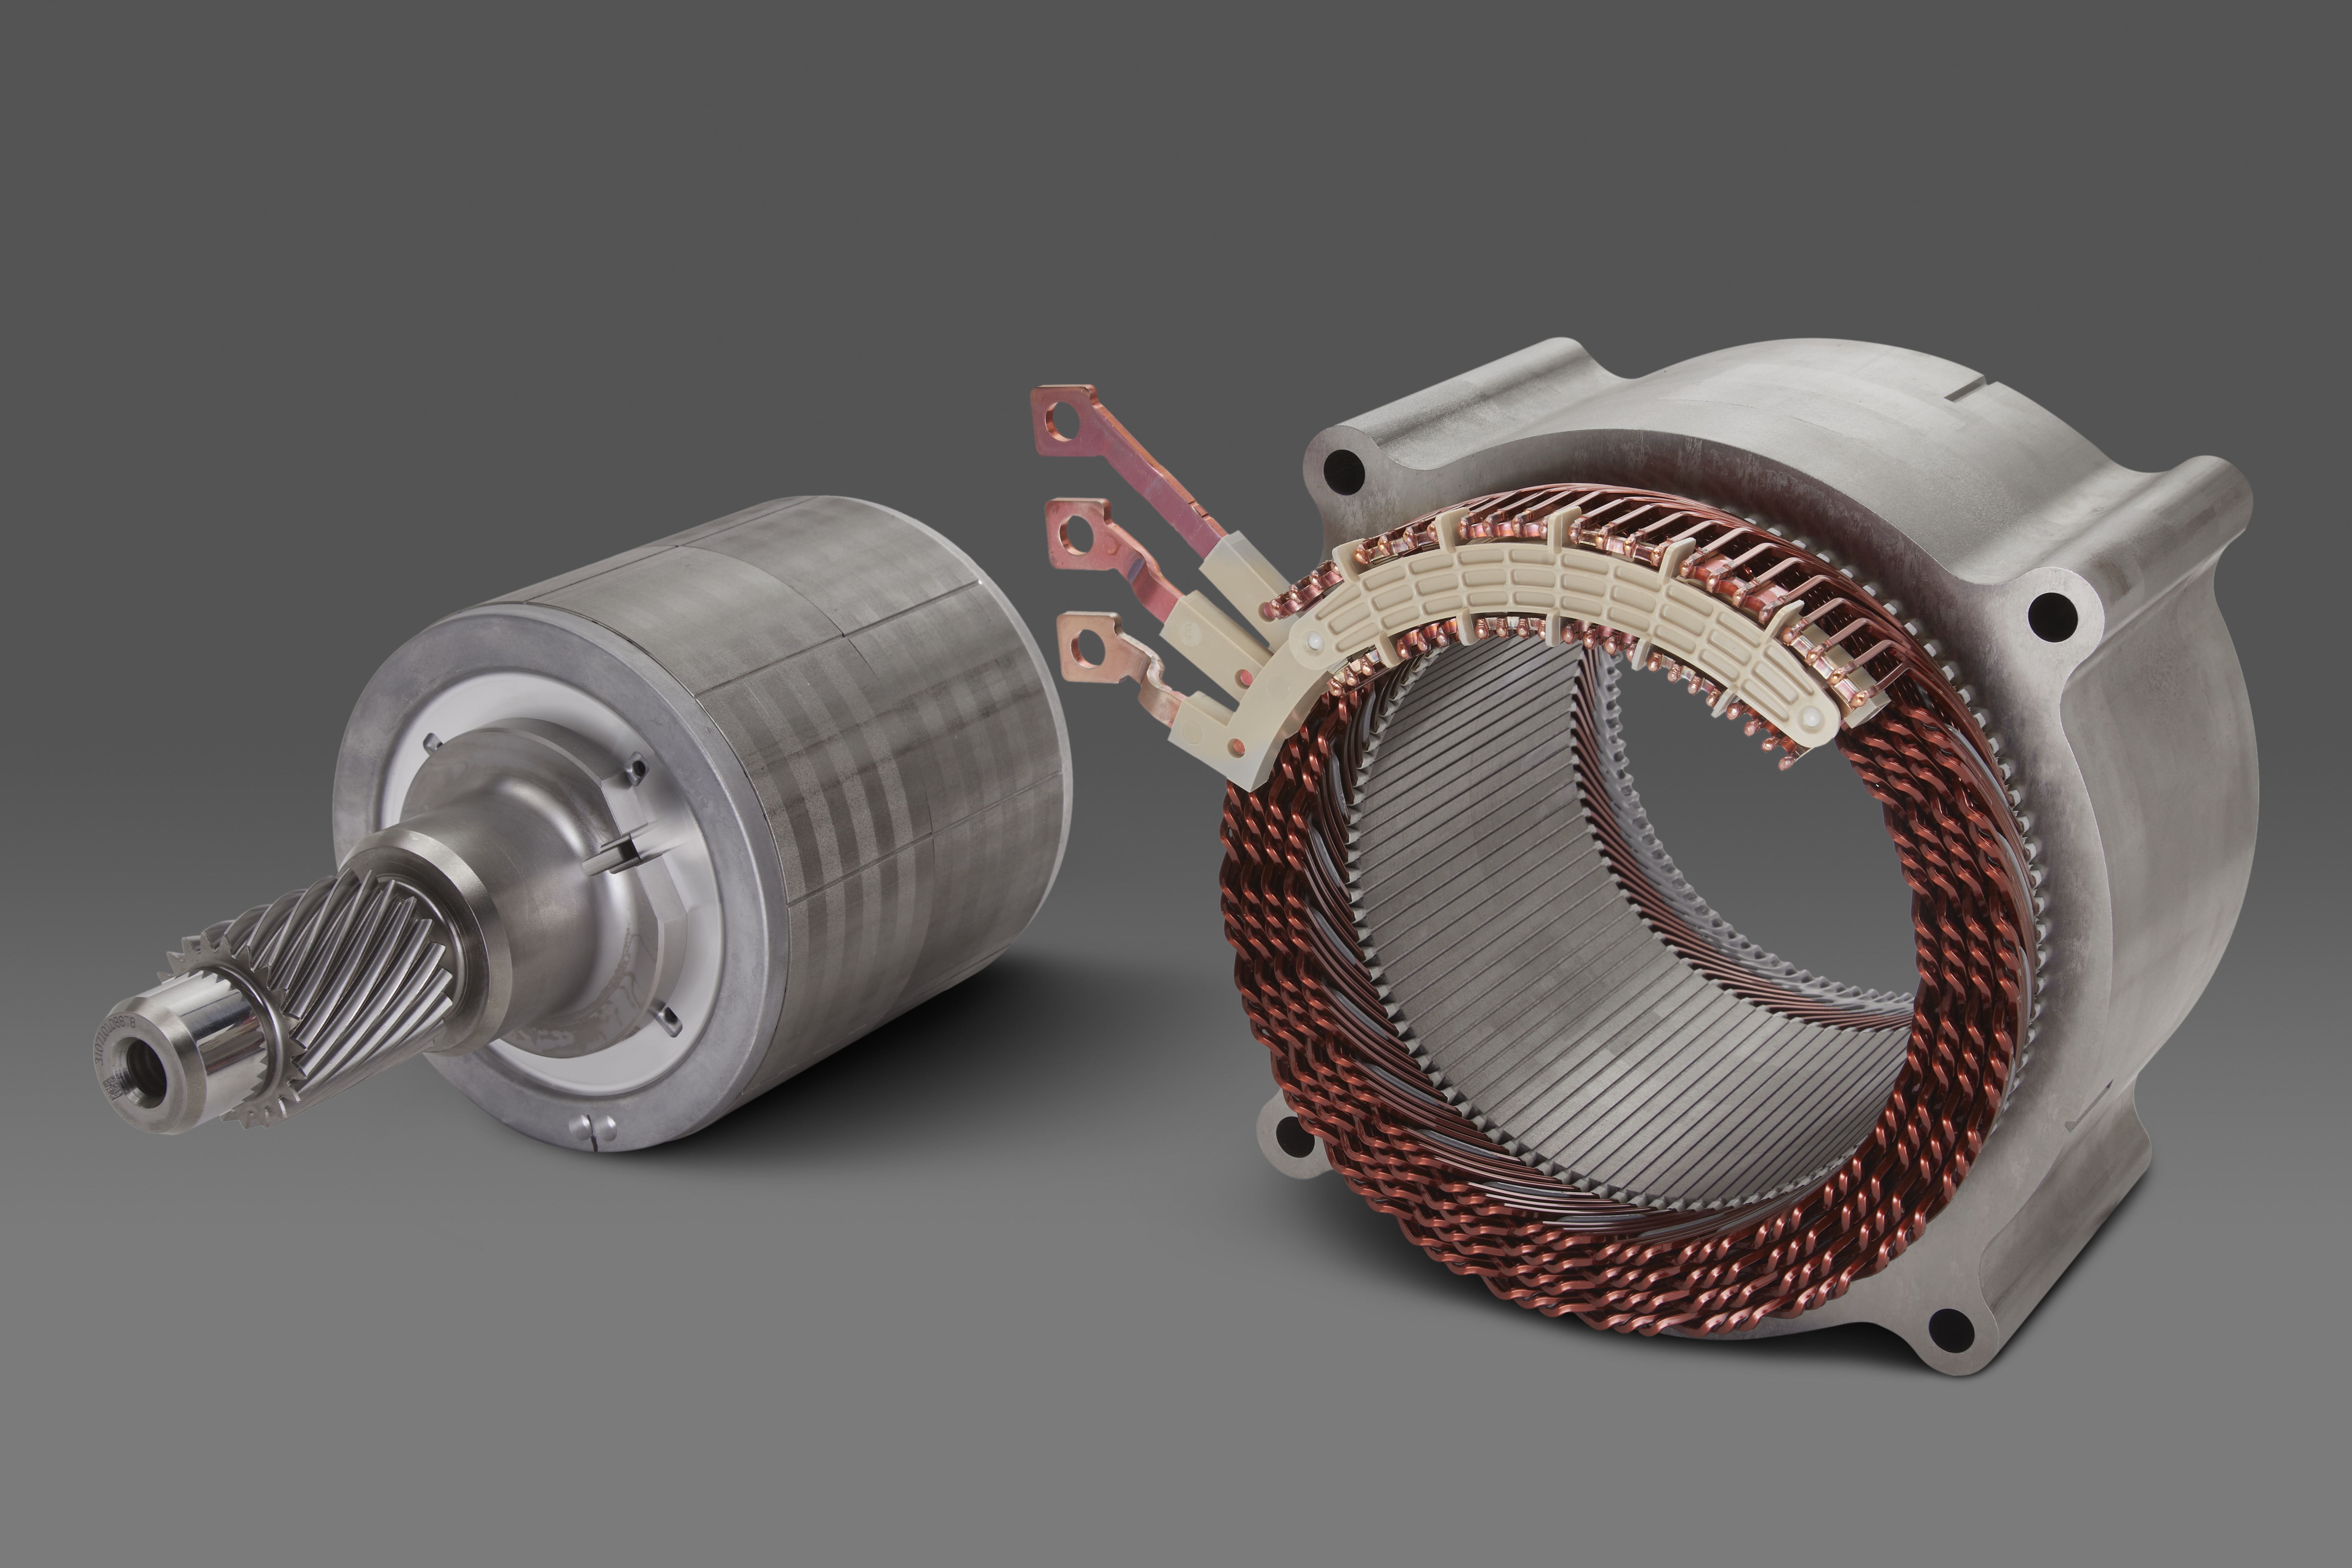 From nanomaterials to the new generation of electric motors